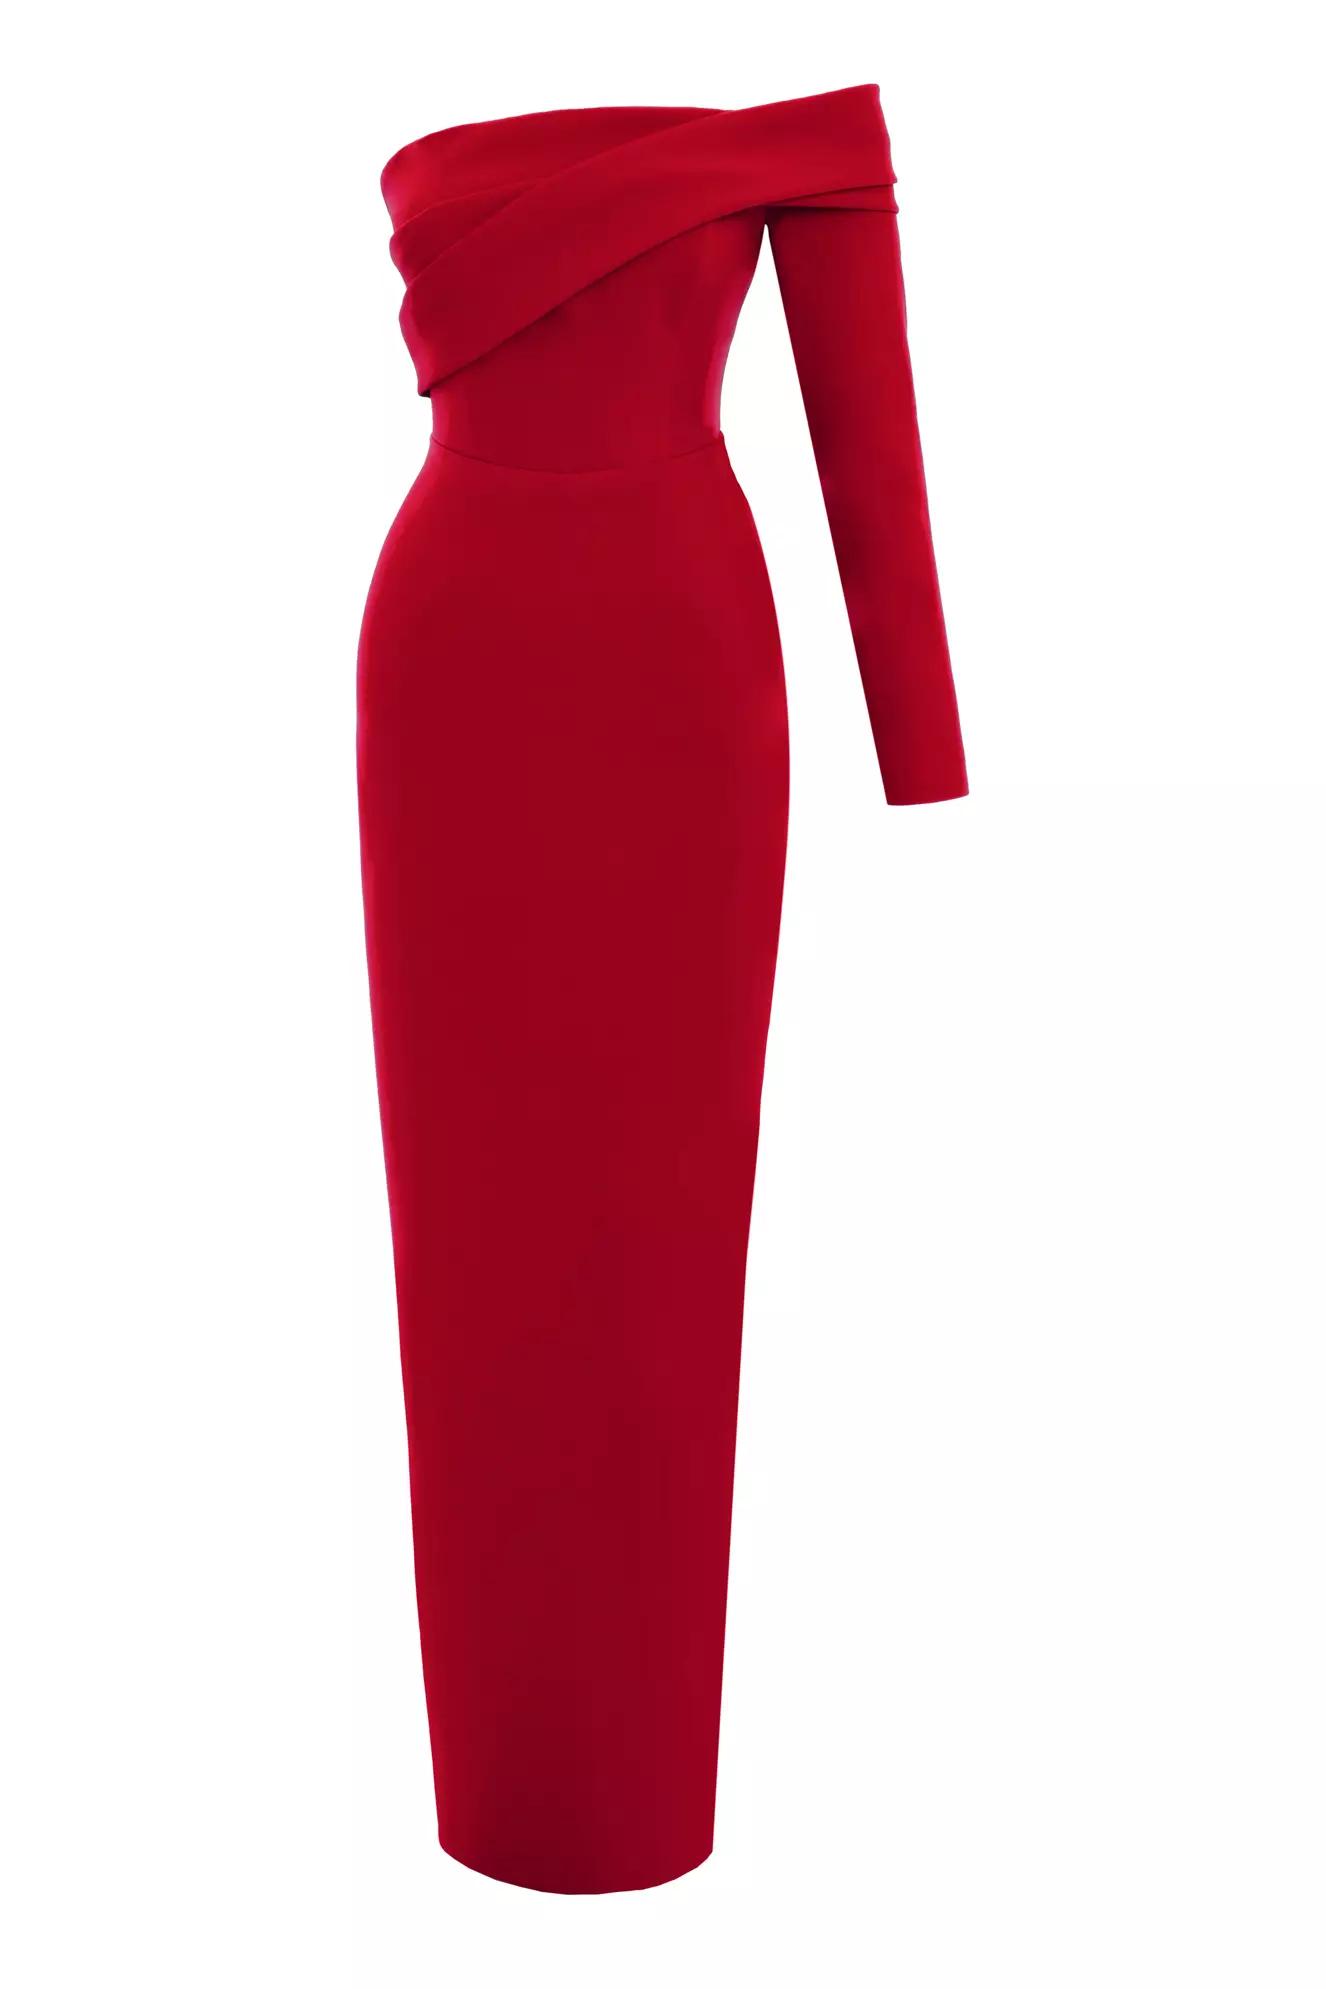 Red crepe one arm long dress